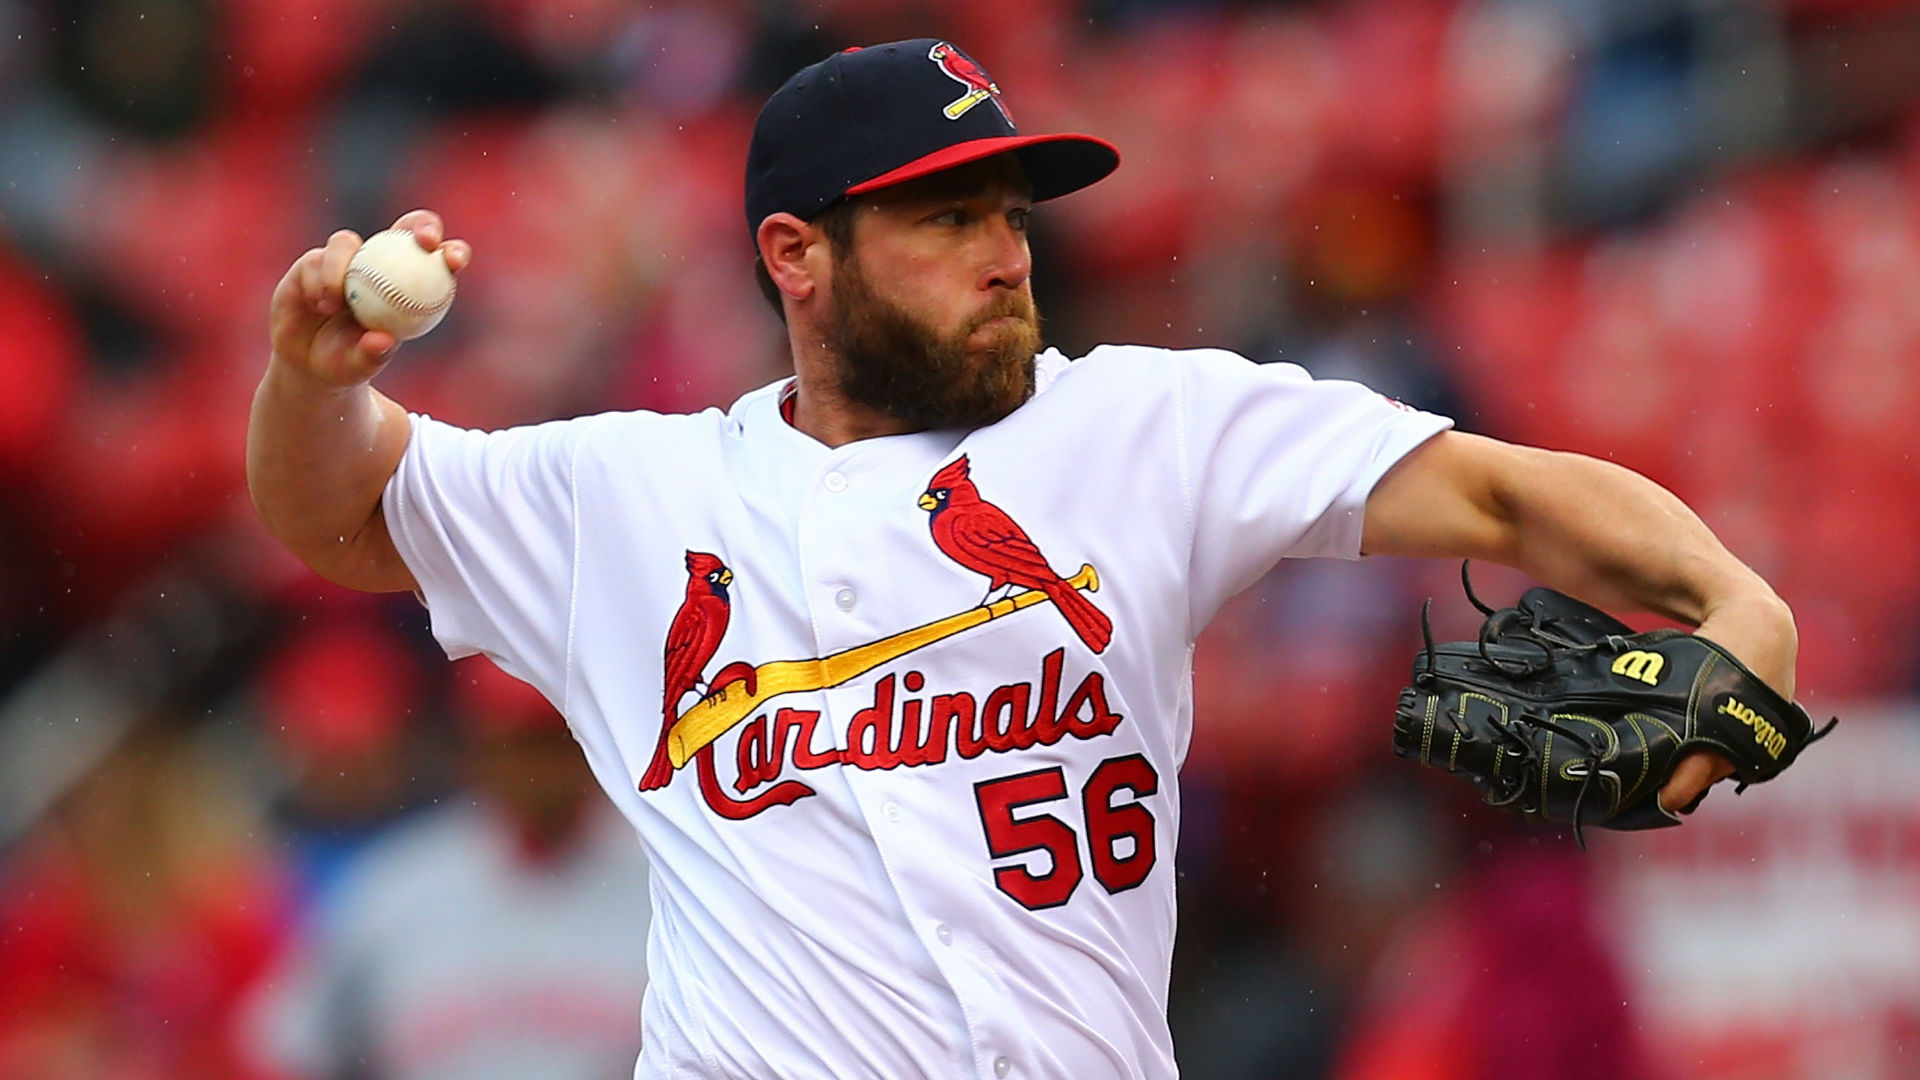 Holland joined the Cardinals in March after a strong season with the Rockies in 2017, but he has recorded a 7.92 ERA in 25 innings in 2018.